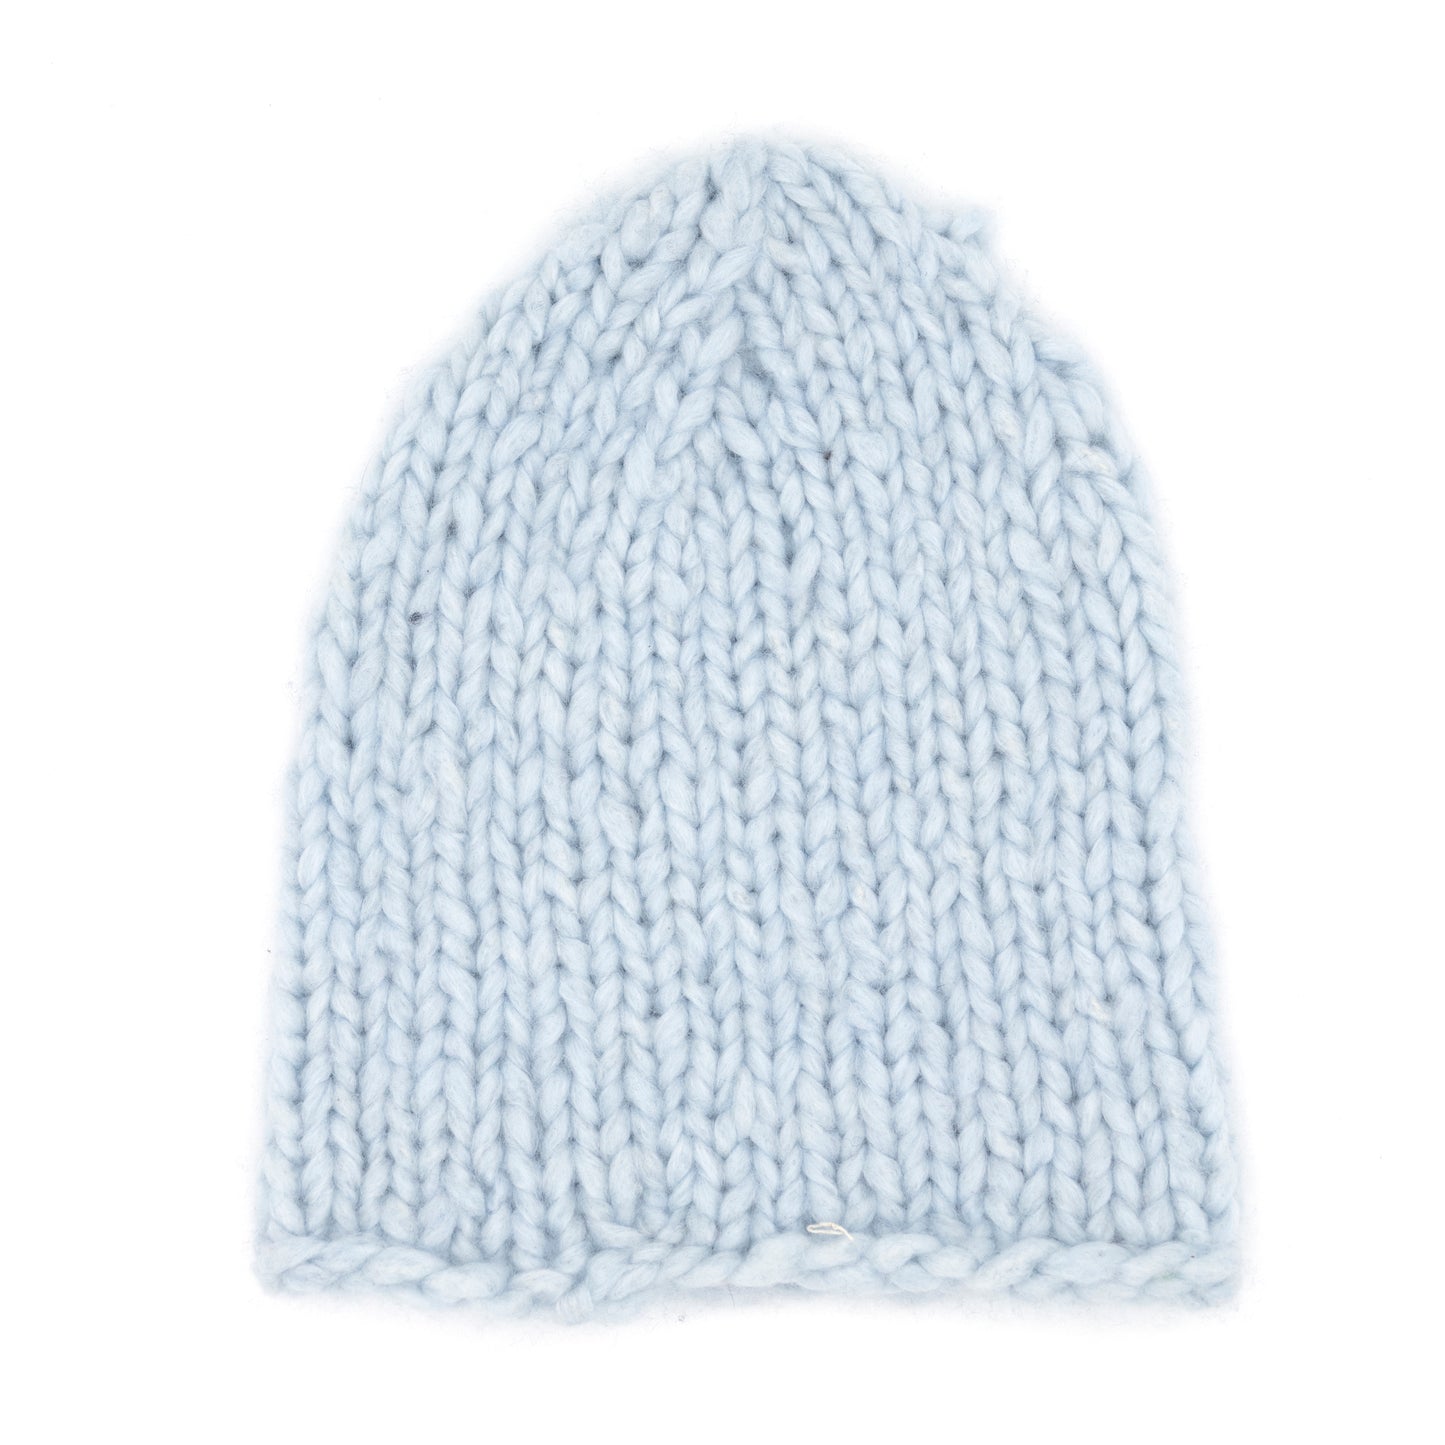 Thick Hand Knit Cashmere Hat - Ice Blue